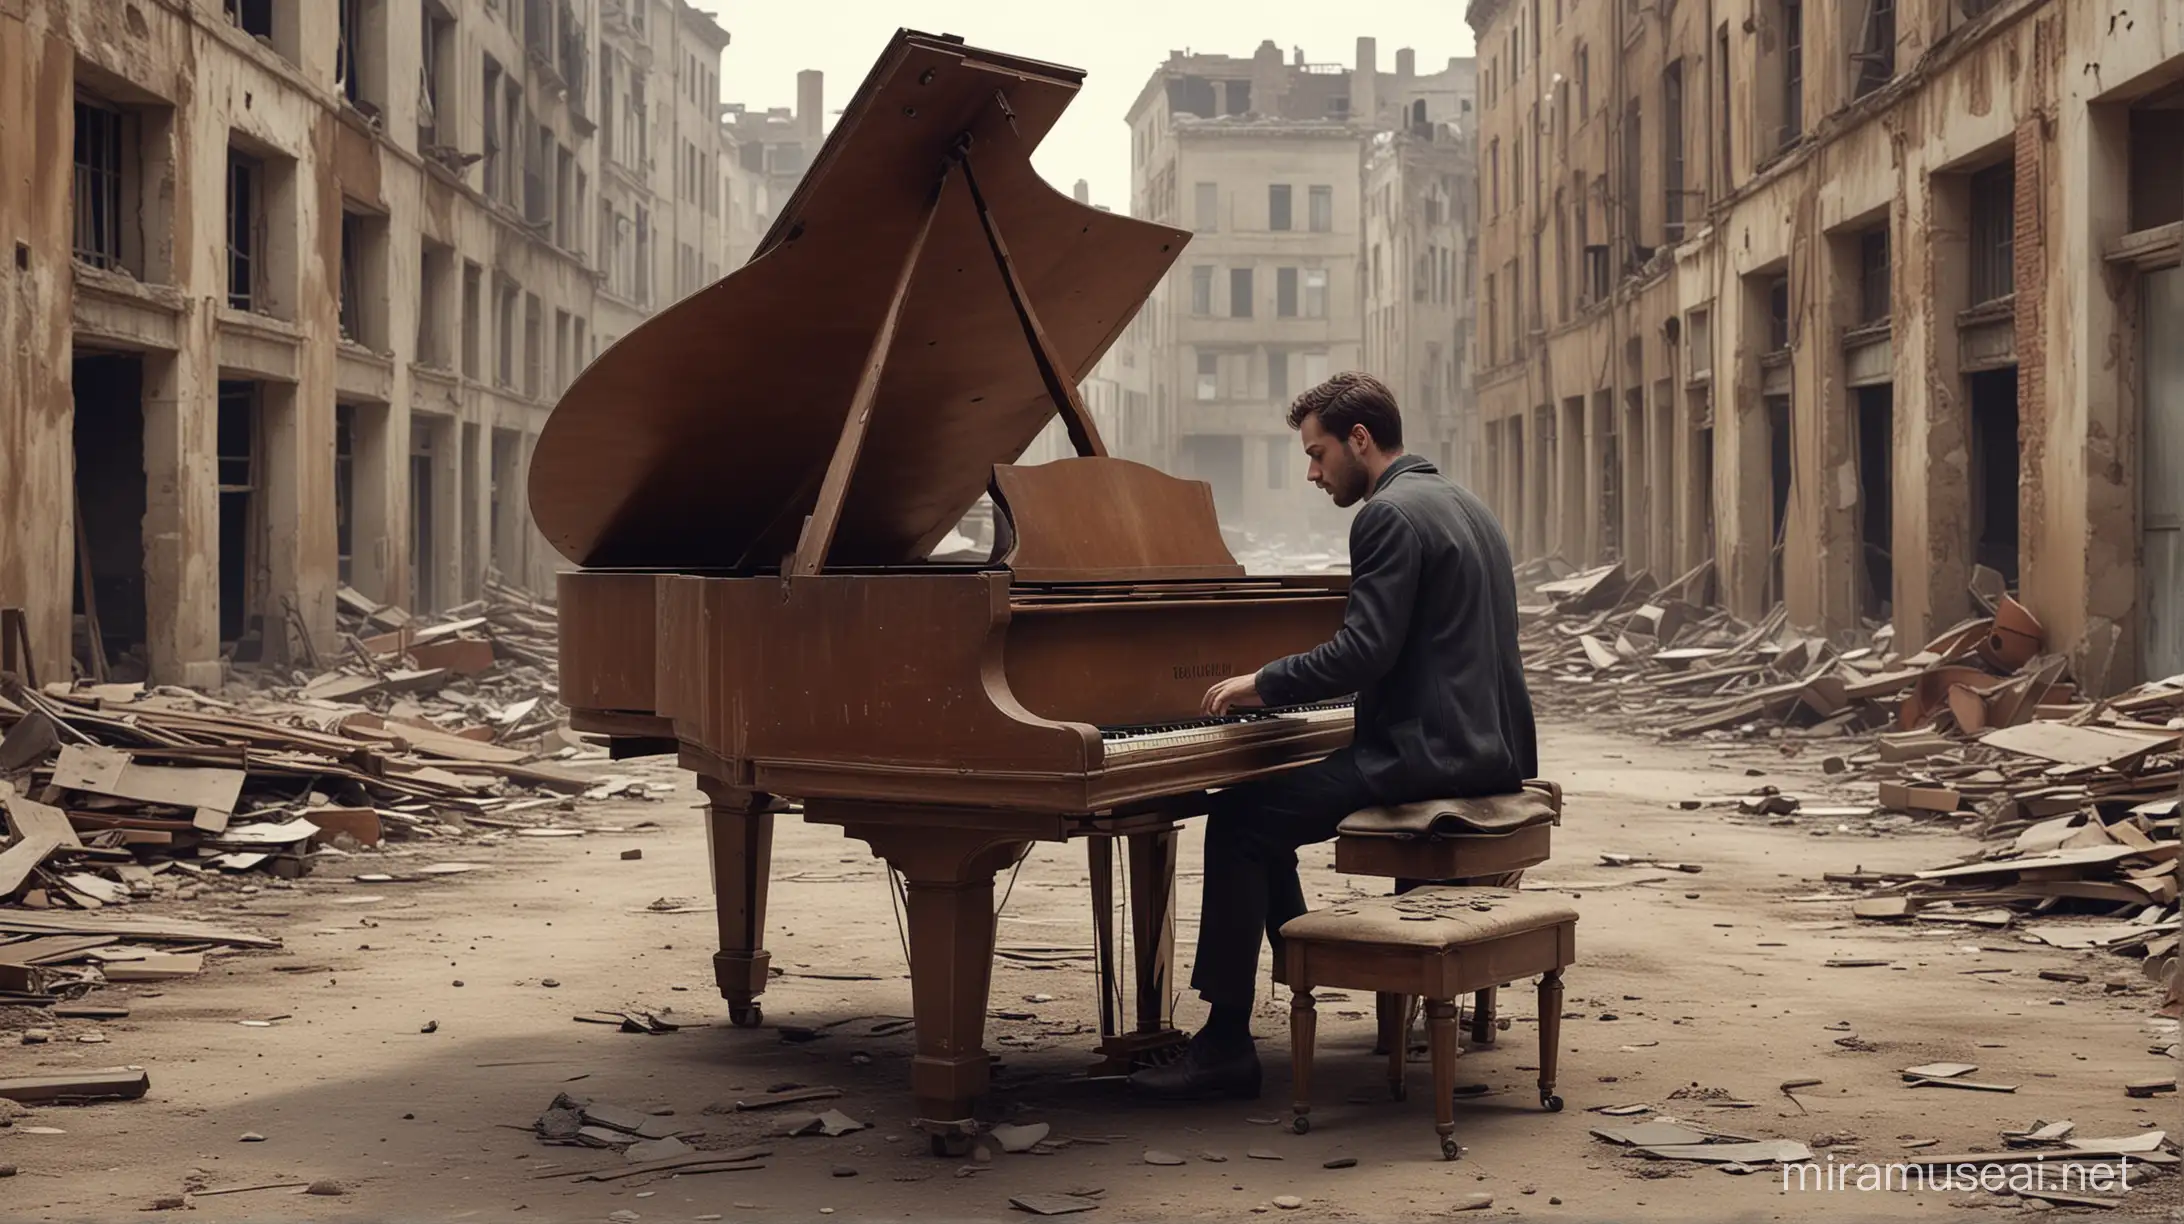 Some virtuso guy playing a grand piano in an abandoned city vintage graphic 